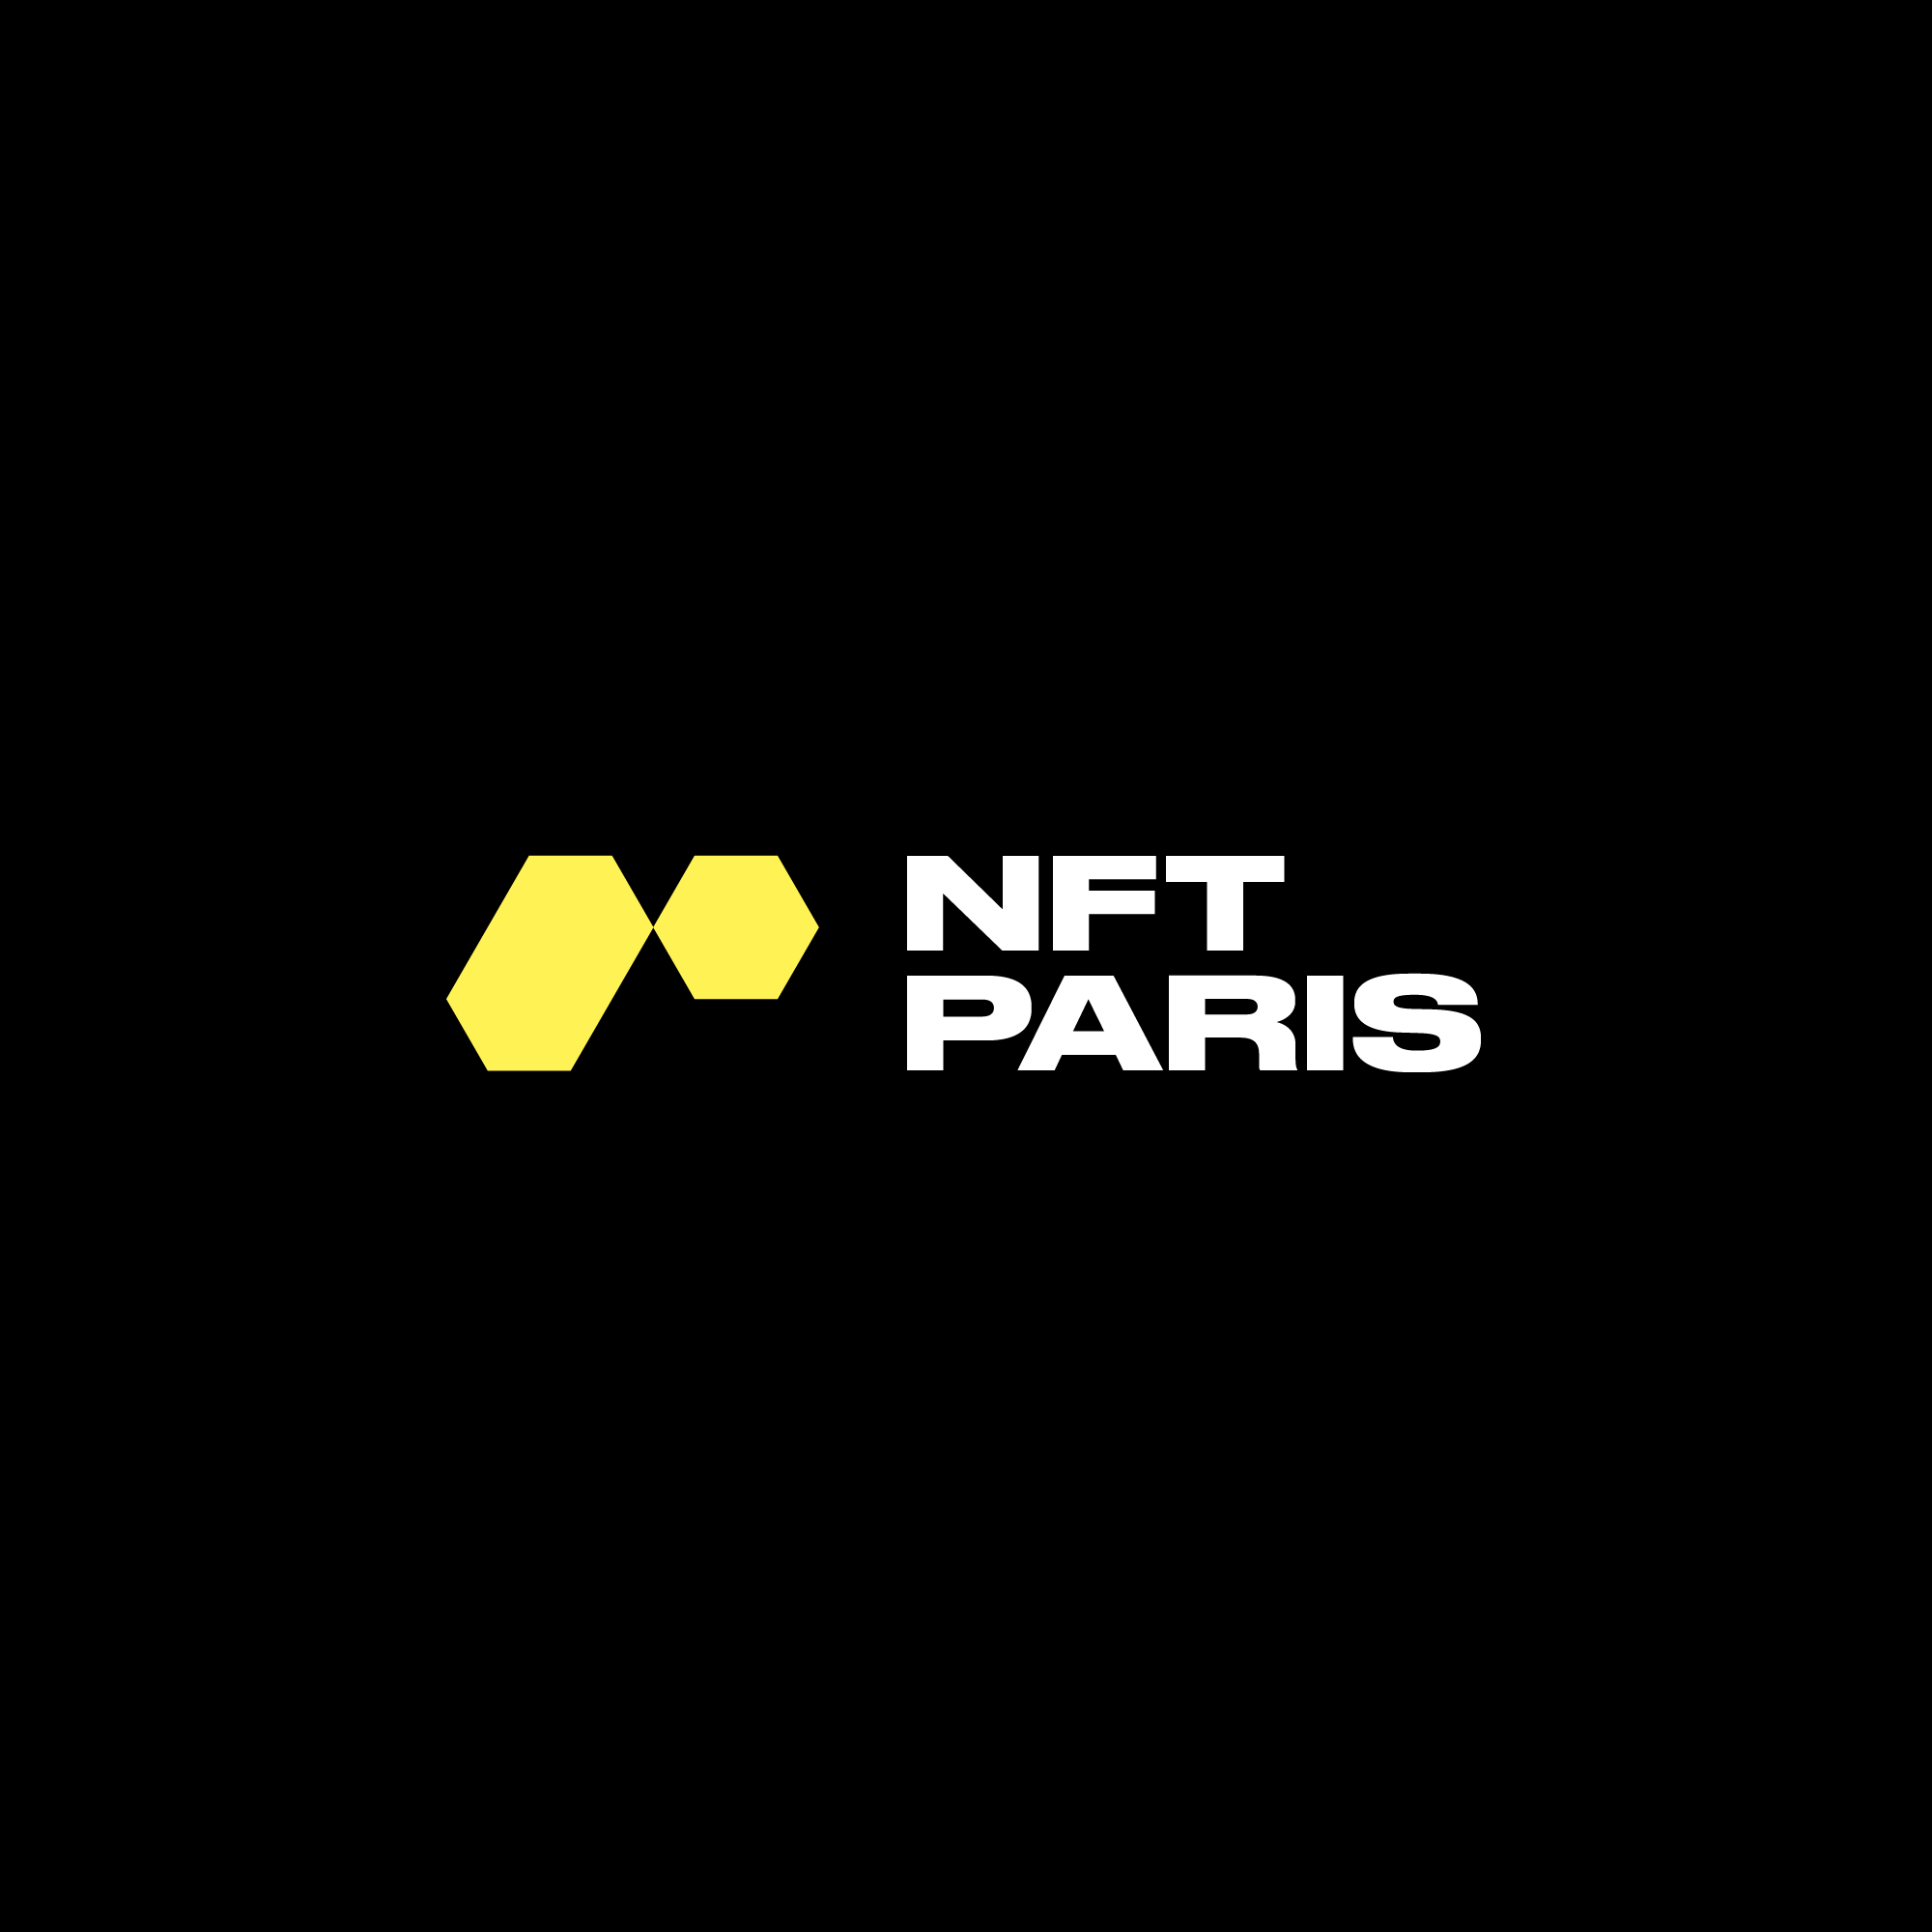 NFT Paris Get 20 OFF on your tickets to Europe's Largest NFT event!